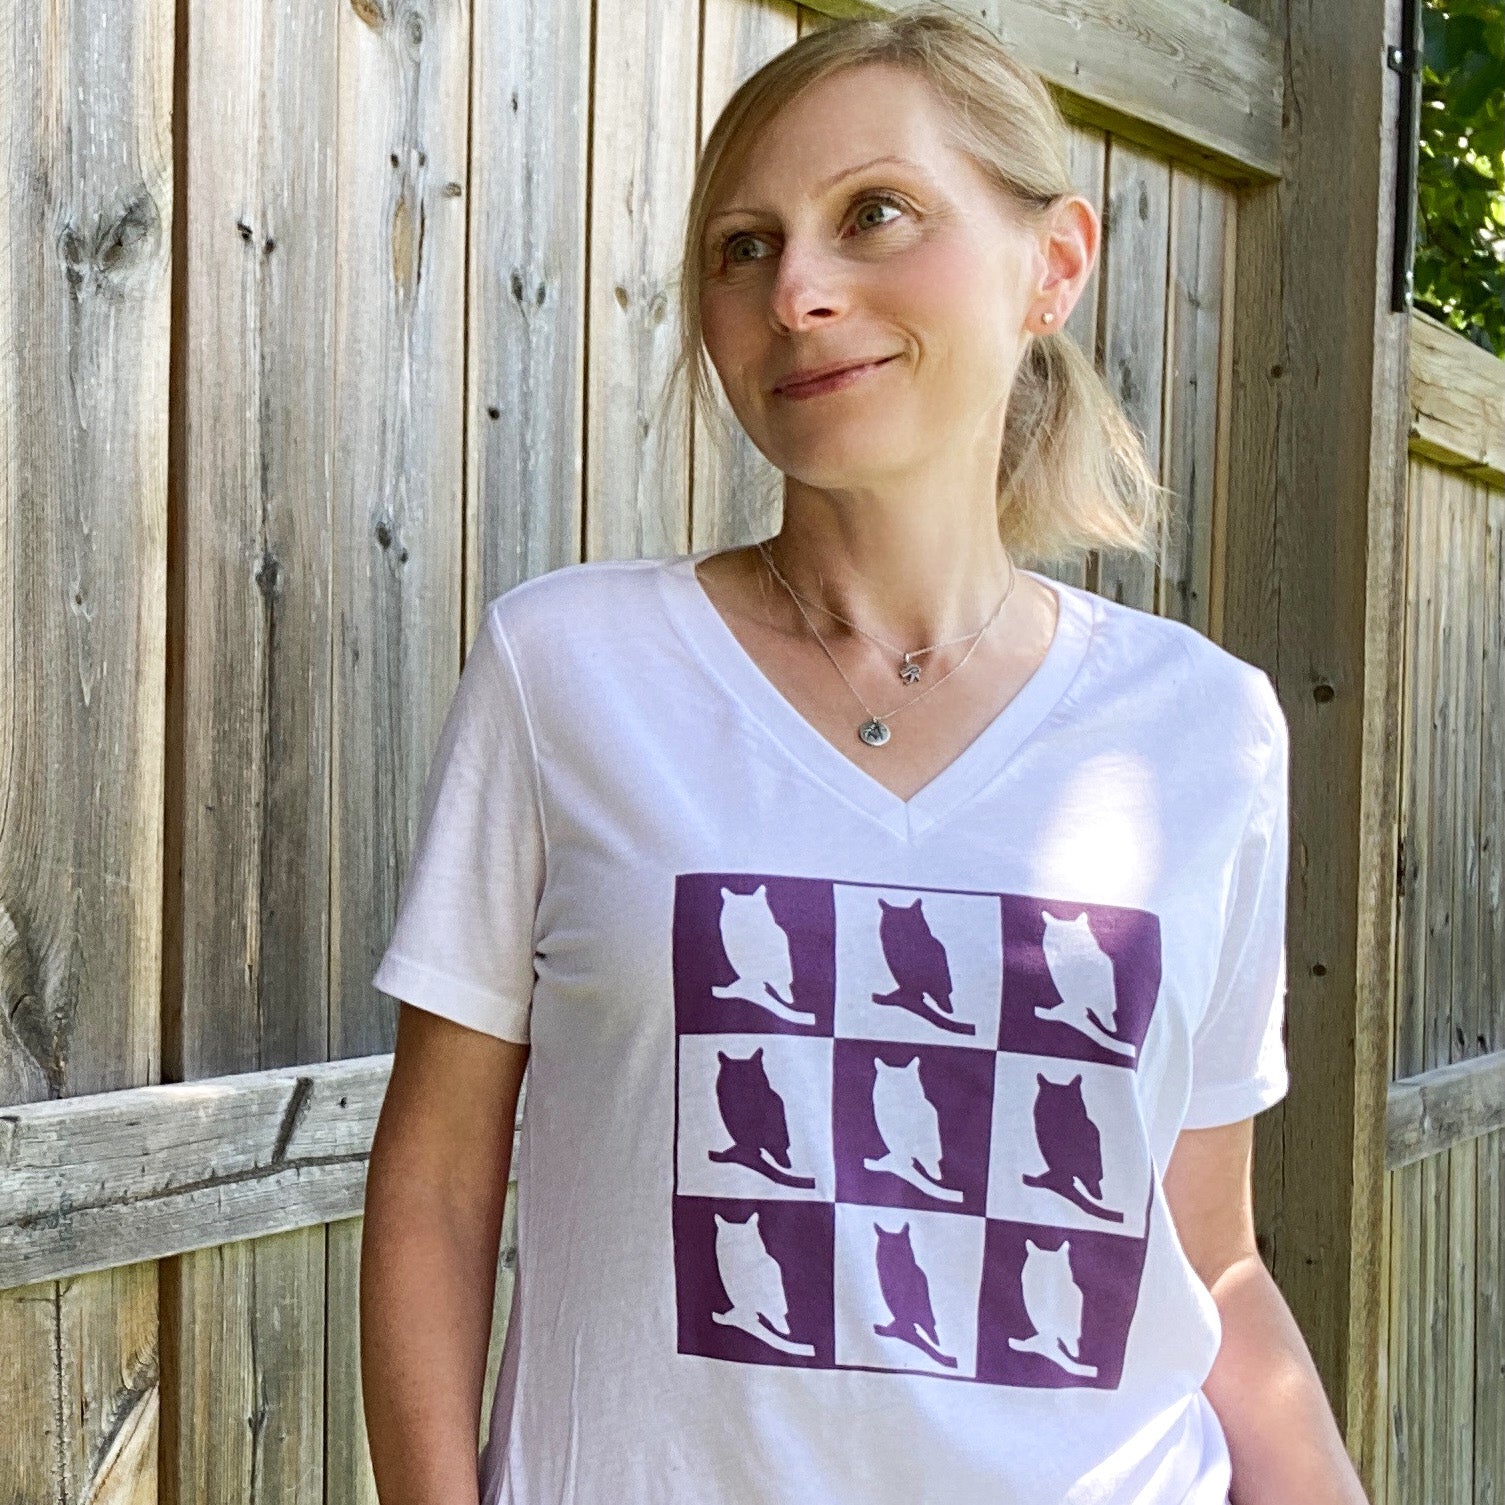 A picture of a woman wearing a white t-shirt.  The image on this t-shirt has nine squares, three per row, of alternating purple and white owls. The white owl has a purple background, and the purple owl is in front of a white background.